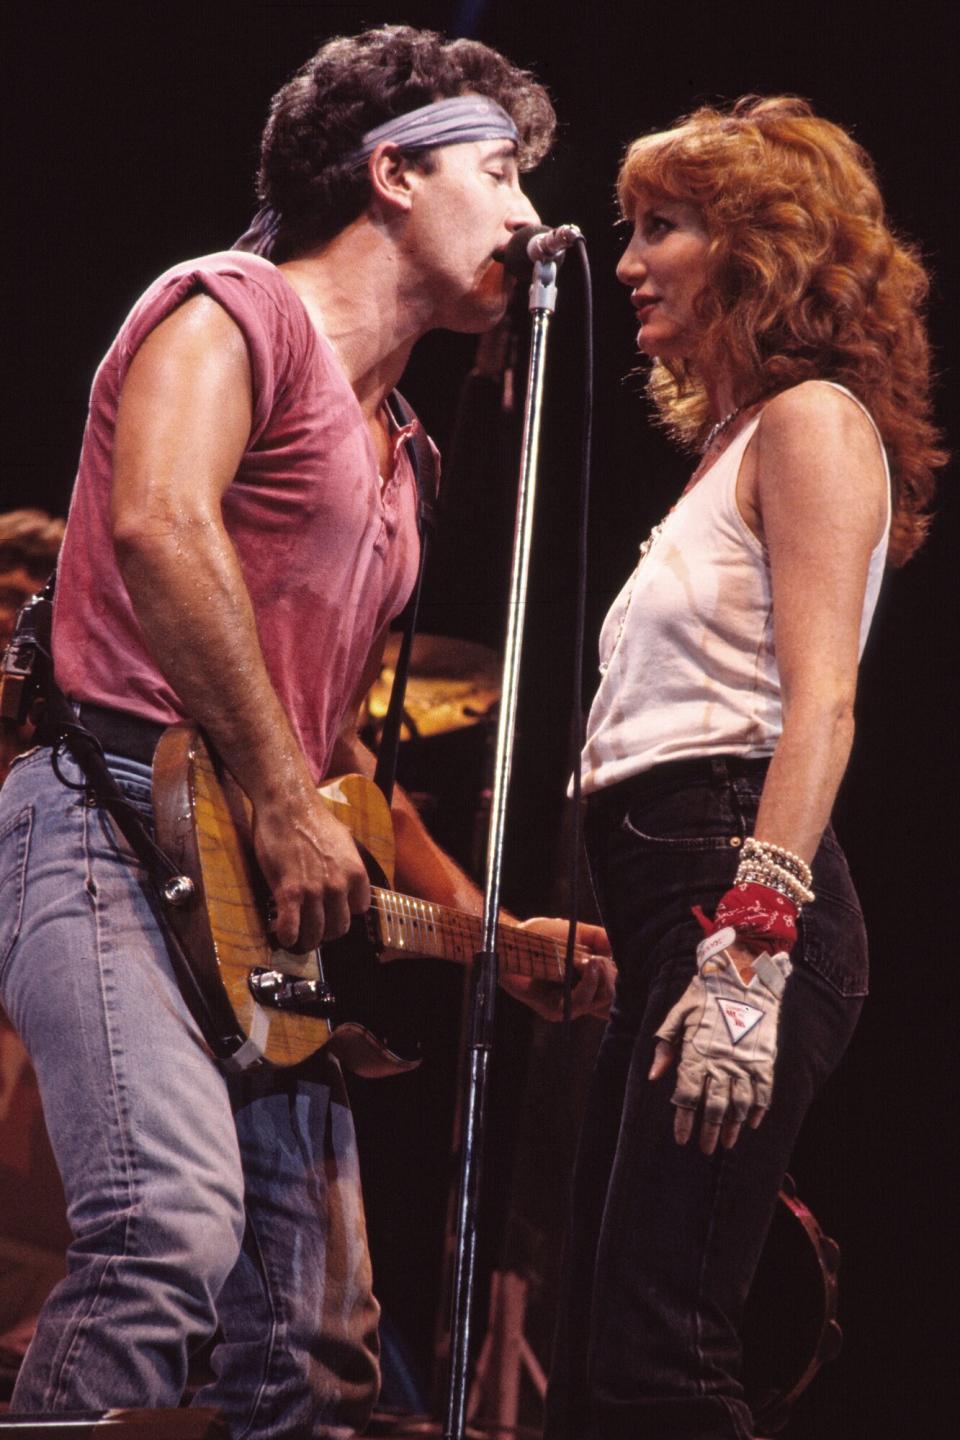 American Rock musicians Bruce Springsteen, on guitar, and backing vocalist Patti Scialfa of the E Street Band, perform onstage during the 'Born in the USA' tour, at Giants Stadium, East Rutherford, New Jersey, August 22, 1985.